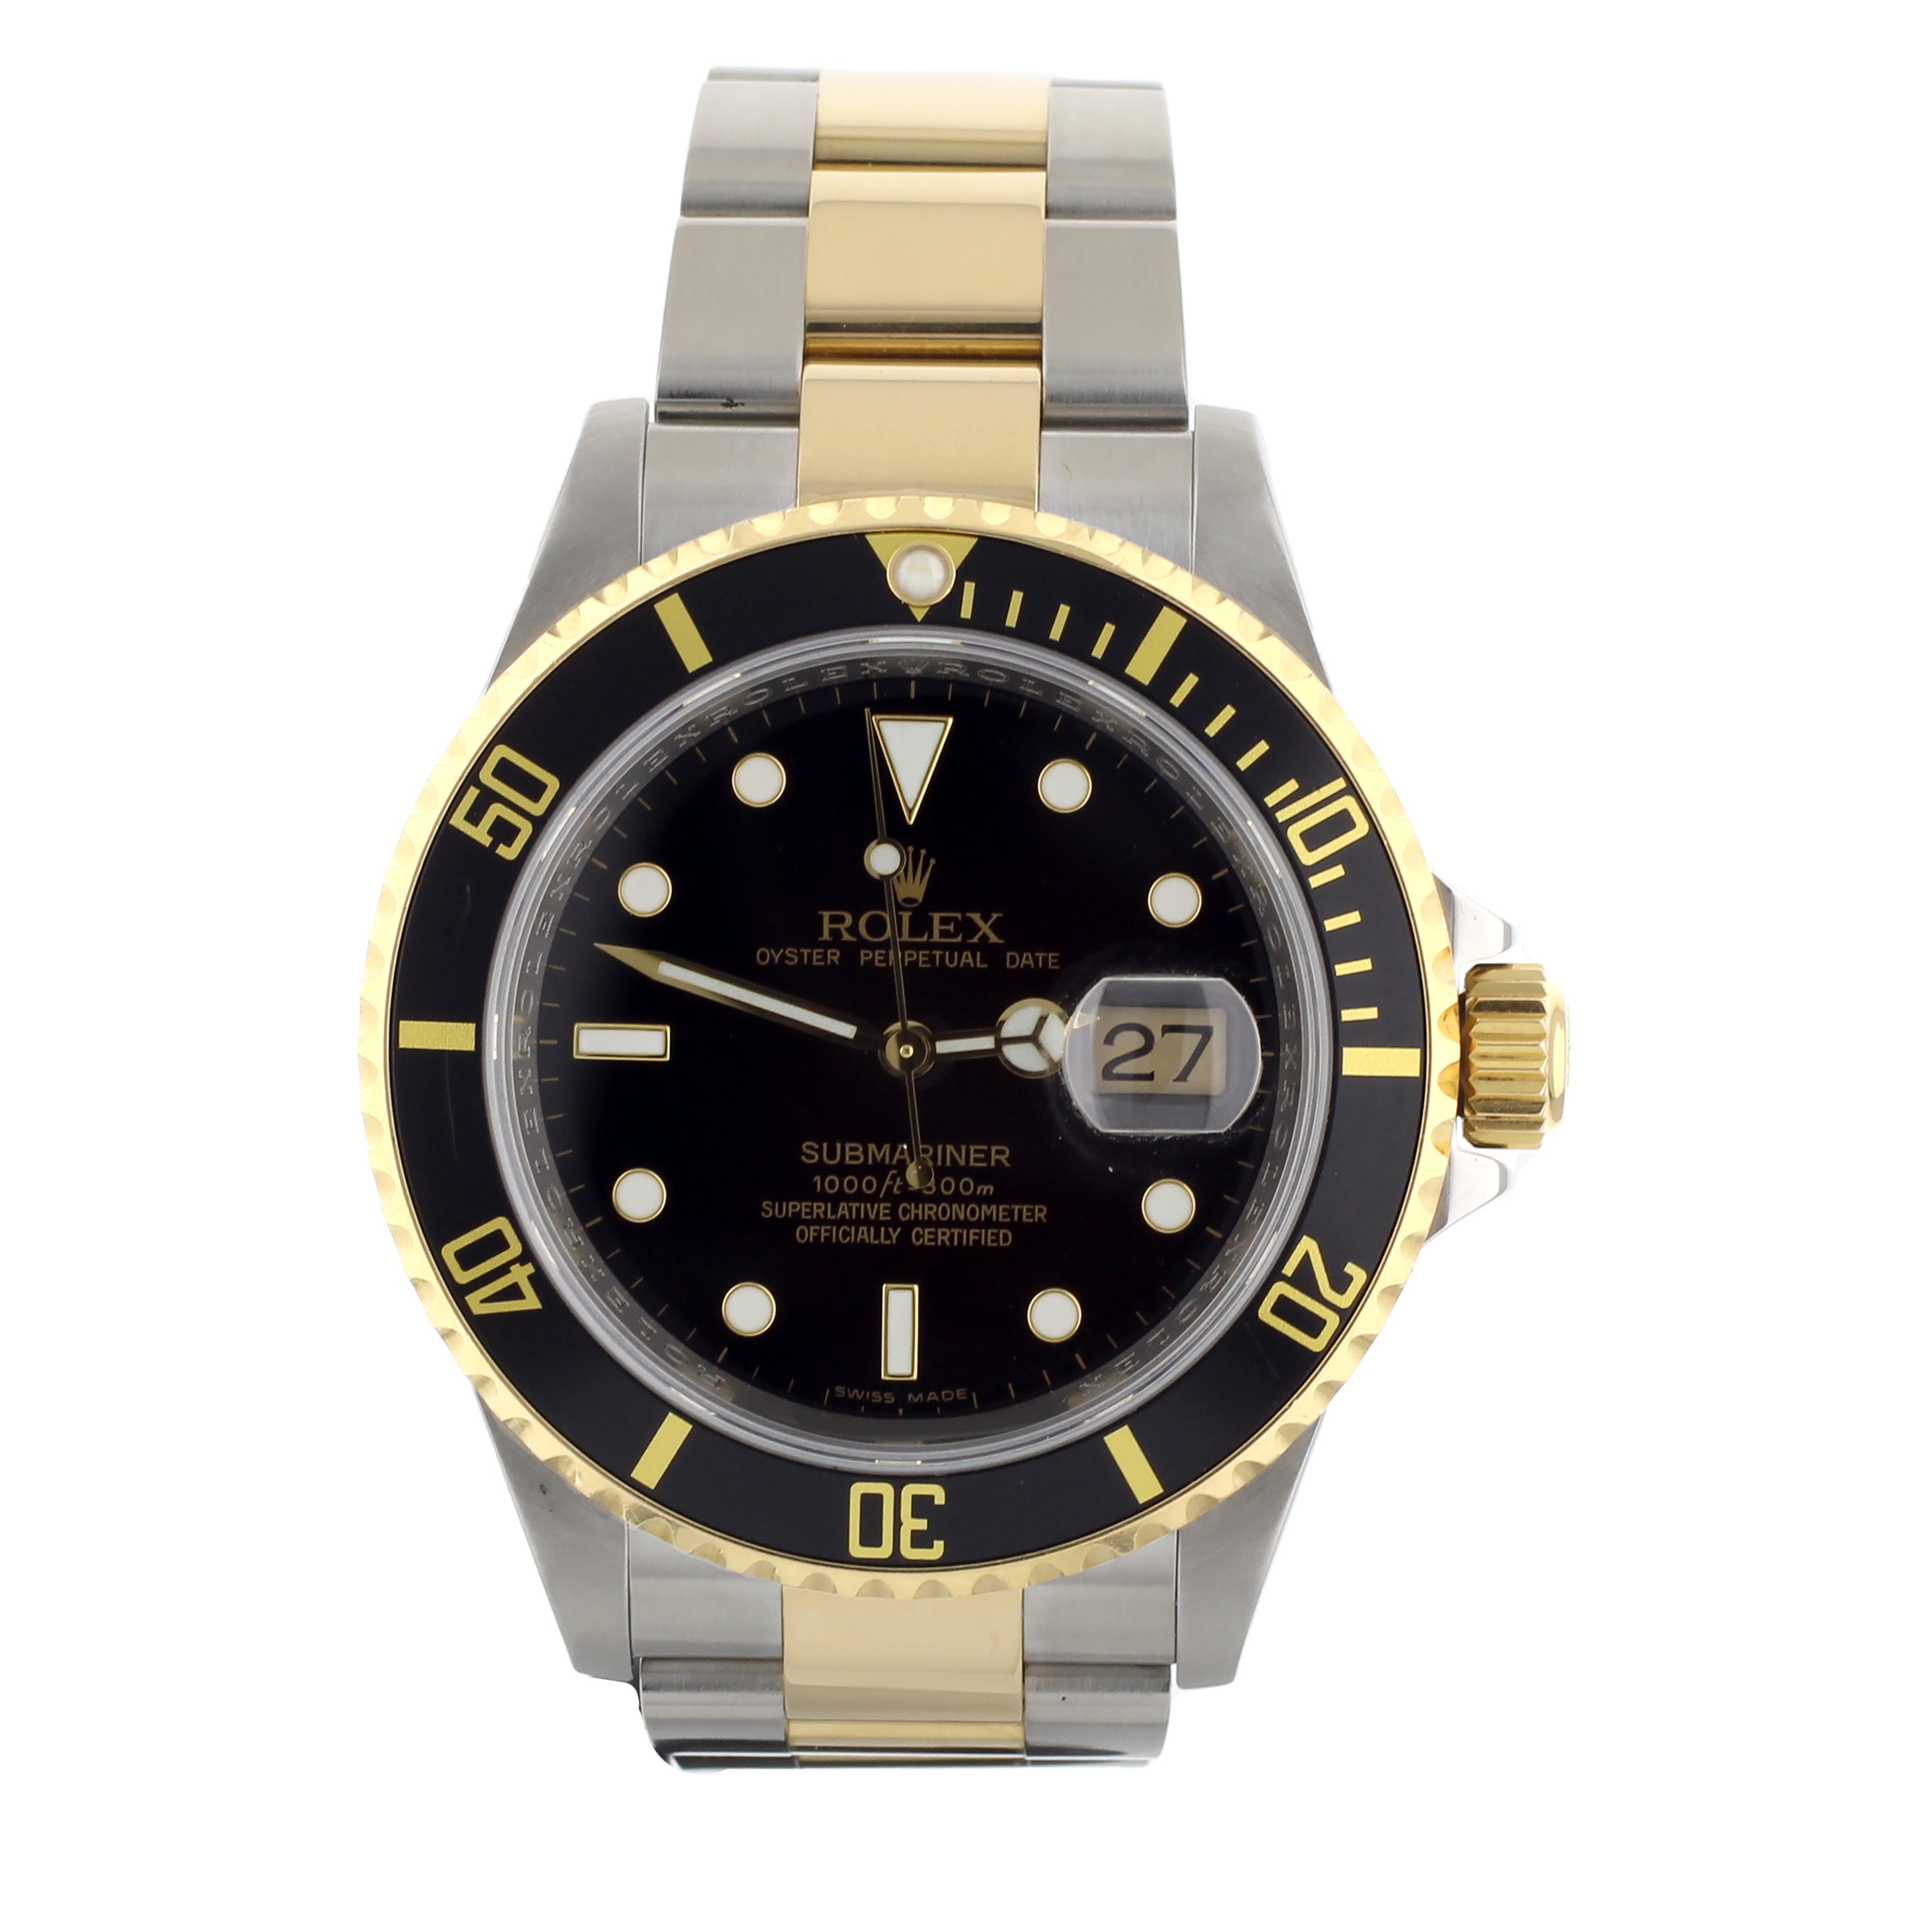 Rolex Submariner Two-Tone Stainless Steel & Yellow Gold